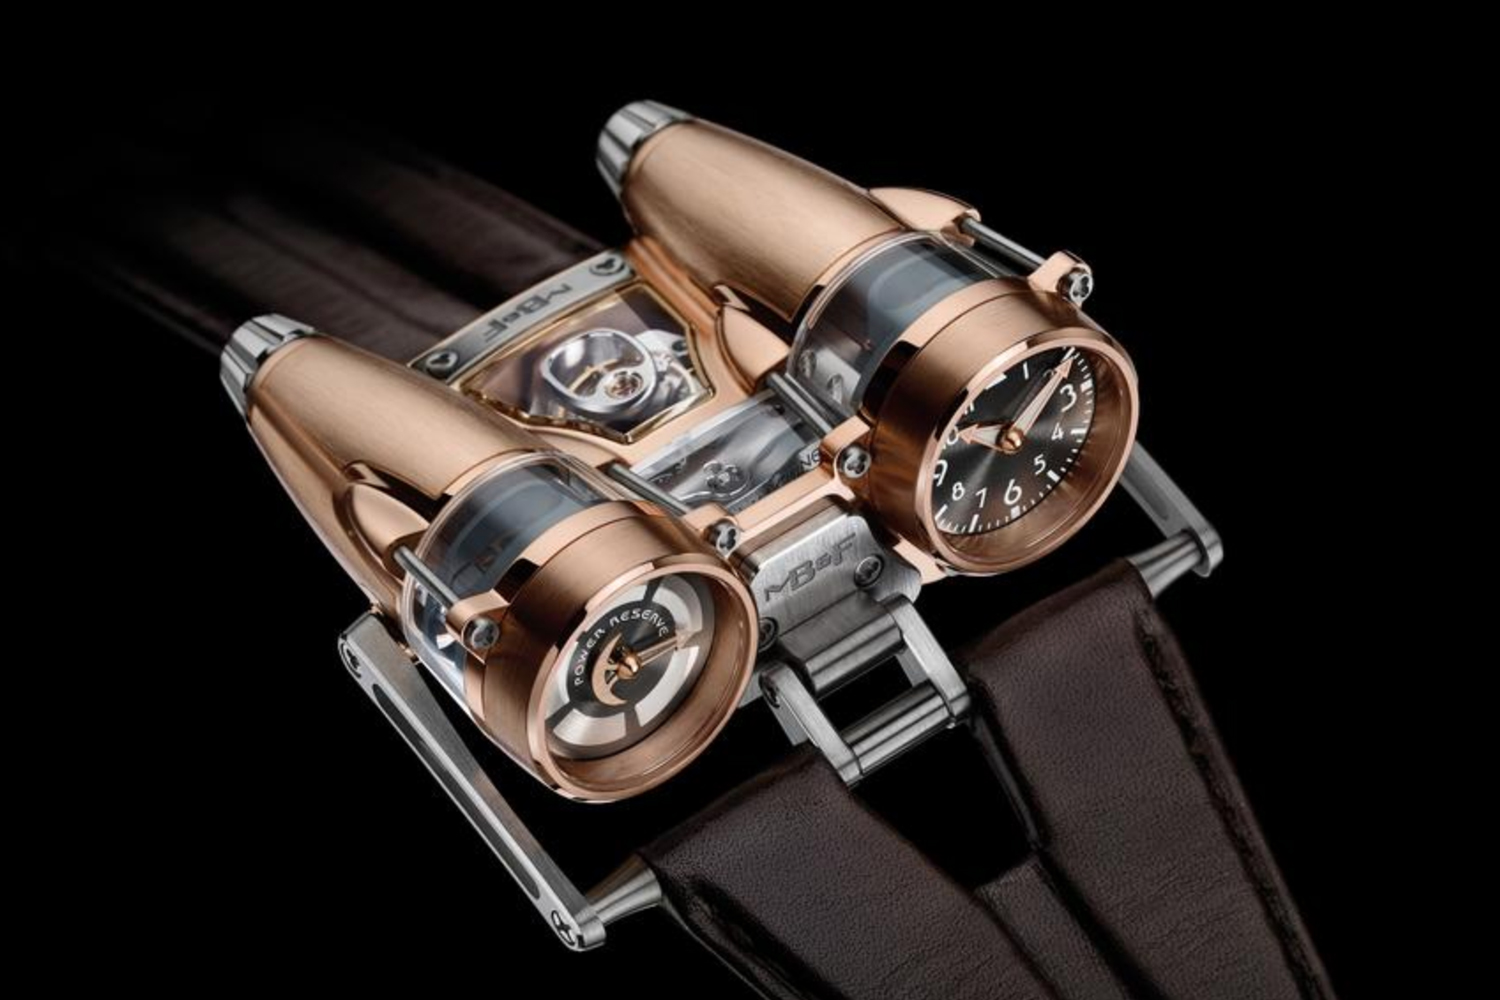 The MB&F Horological Machine No. 4 tops Wei's list of the most avant-garde watches in the modern era